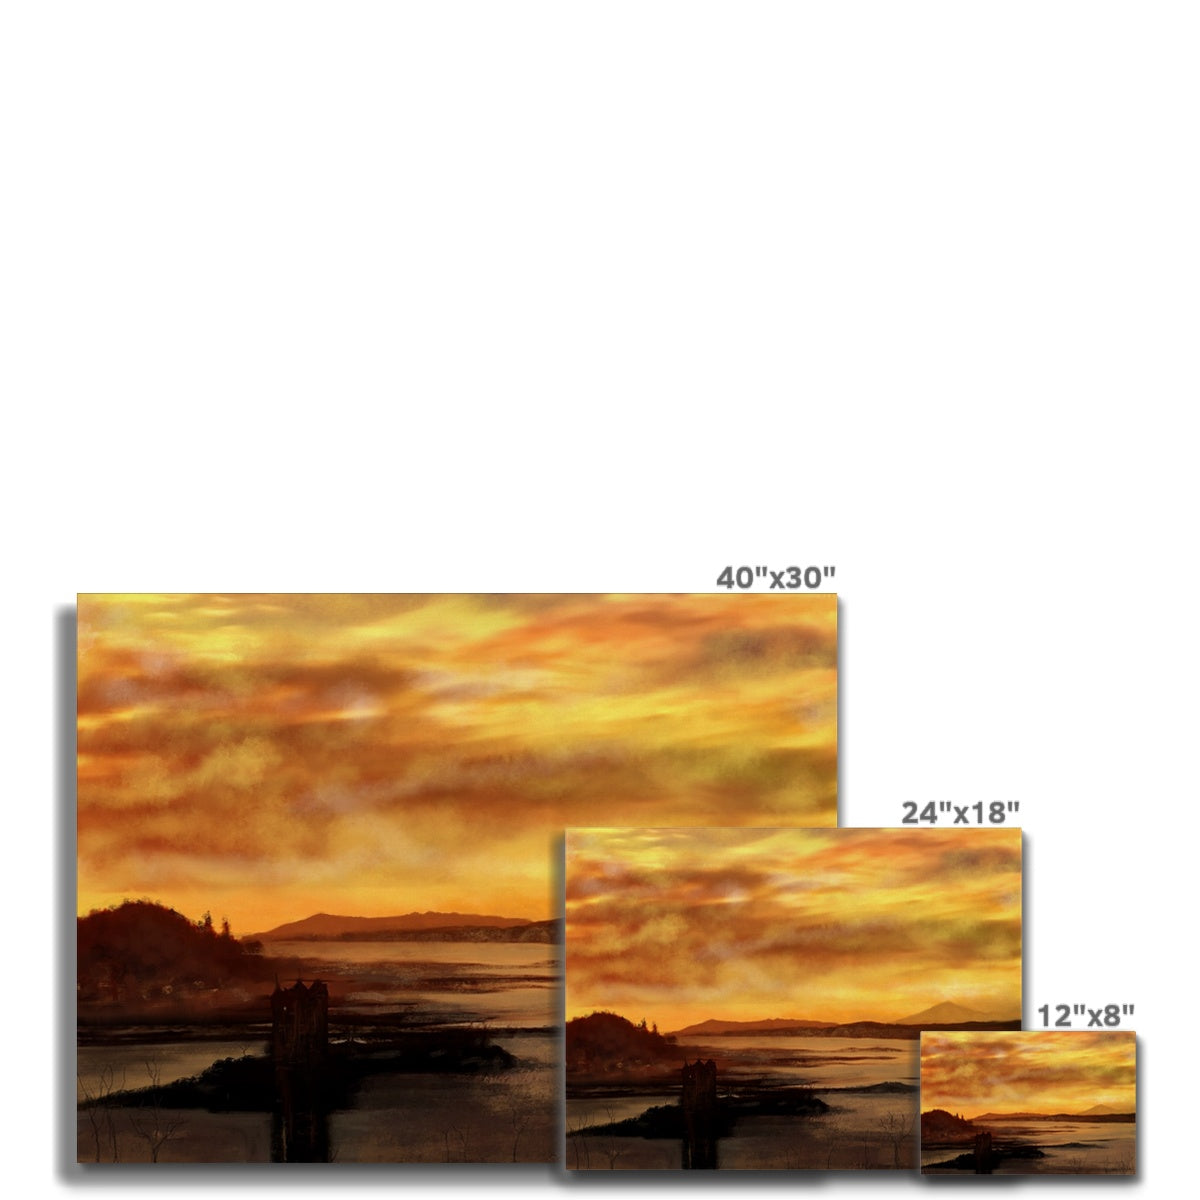 Castle Stalker Dusk Painting | Canvas From Scotland-Contemporary Stretched Canvas Prints-Historic & Iconic Scotland Art Gallery-Paintings, Prints, Homeware, Art Gifts From Scotland By Scottish Artist Kevin Hunter